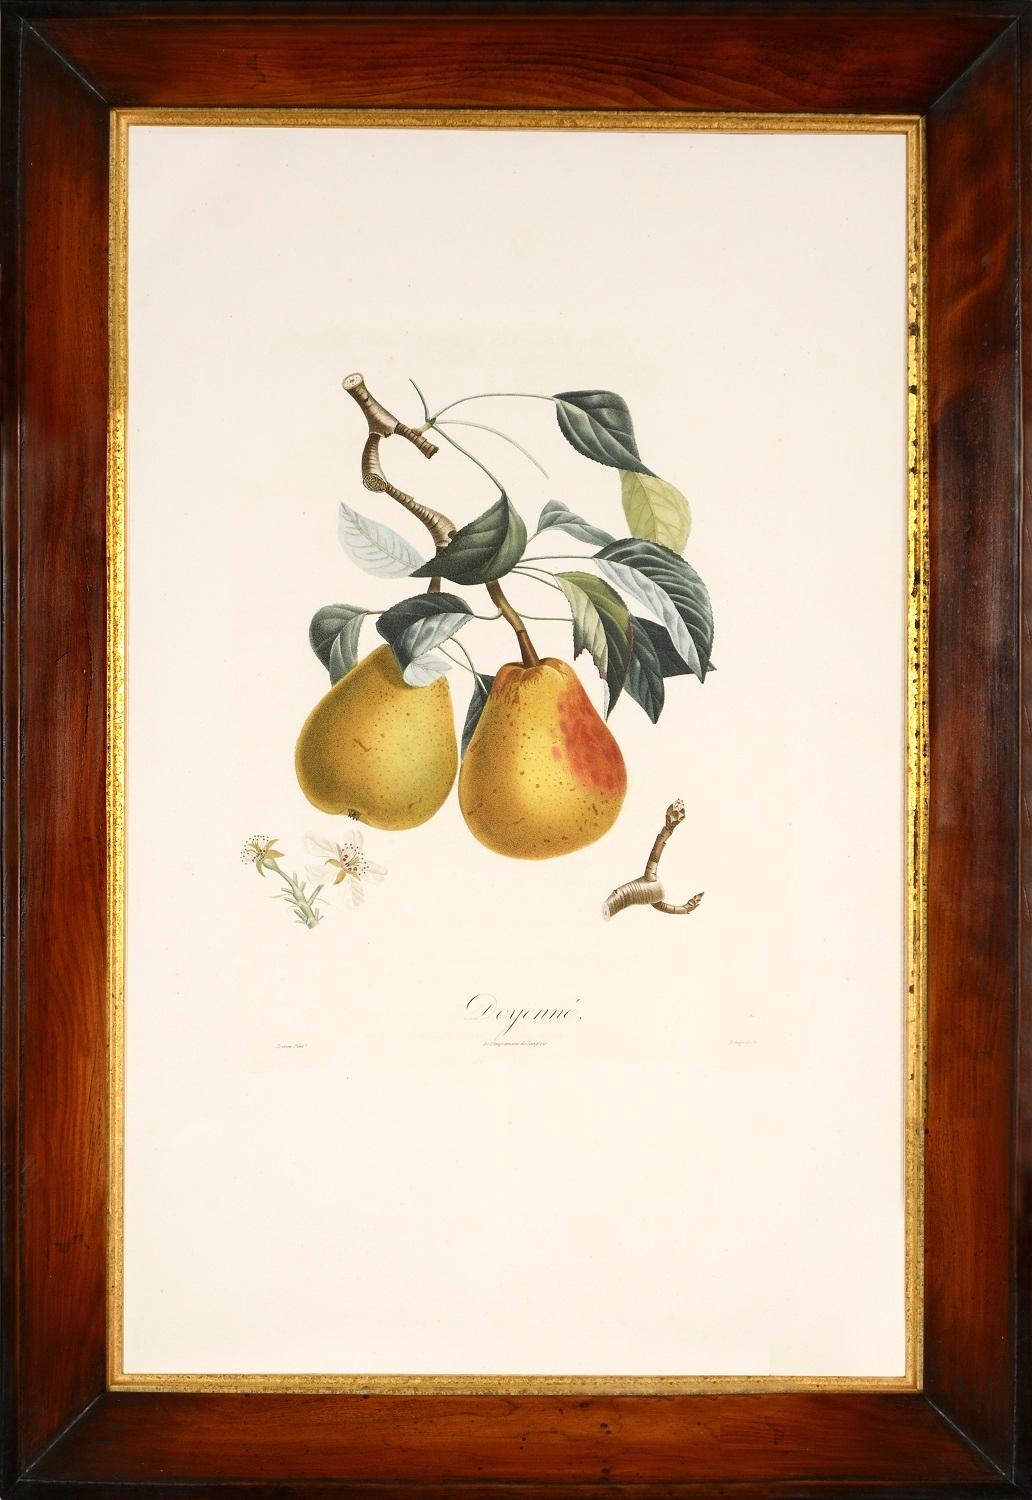  A Group of Six Pears. - Naturalistic Print by TURPIN, P[ierre Jean Francois]